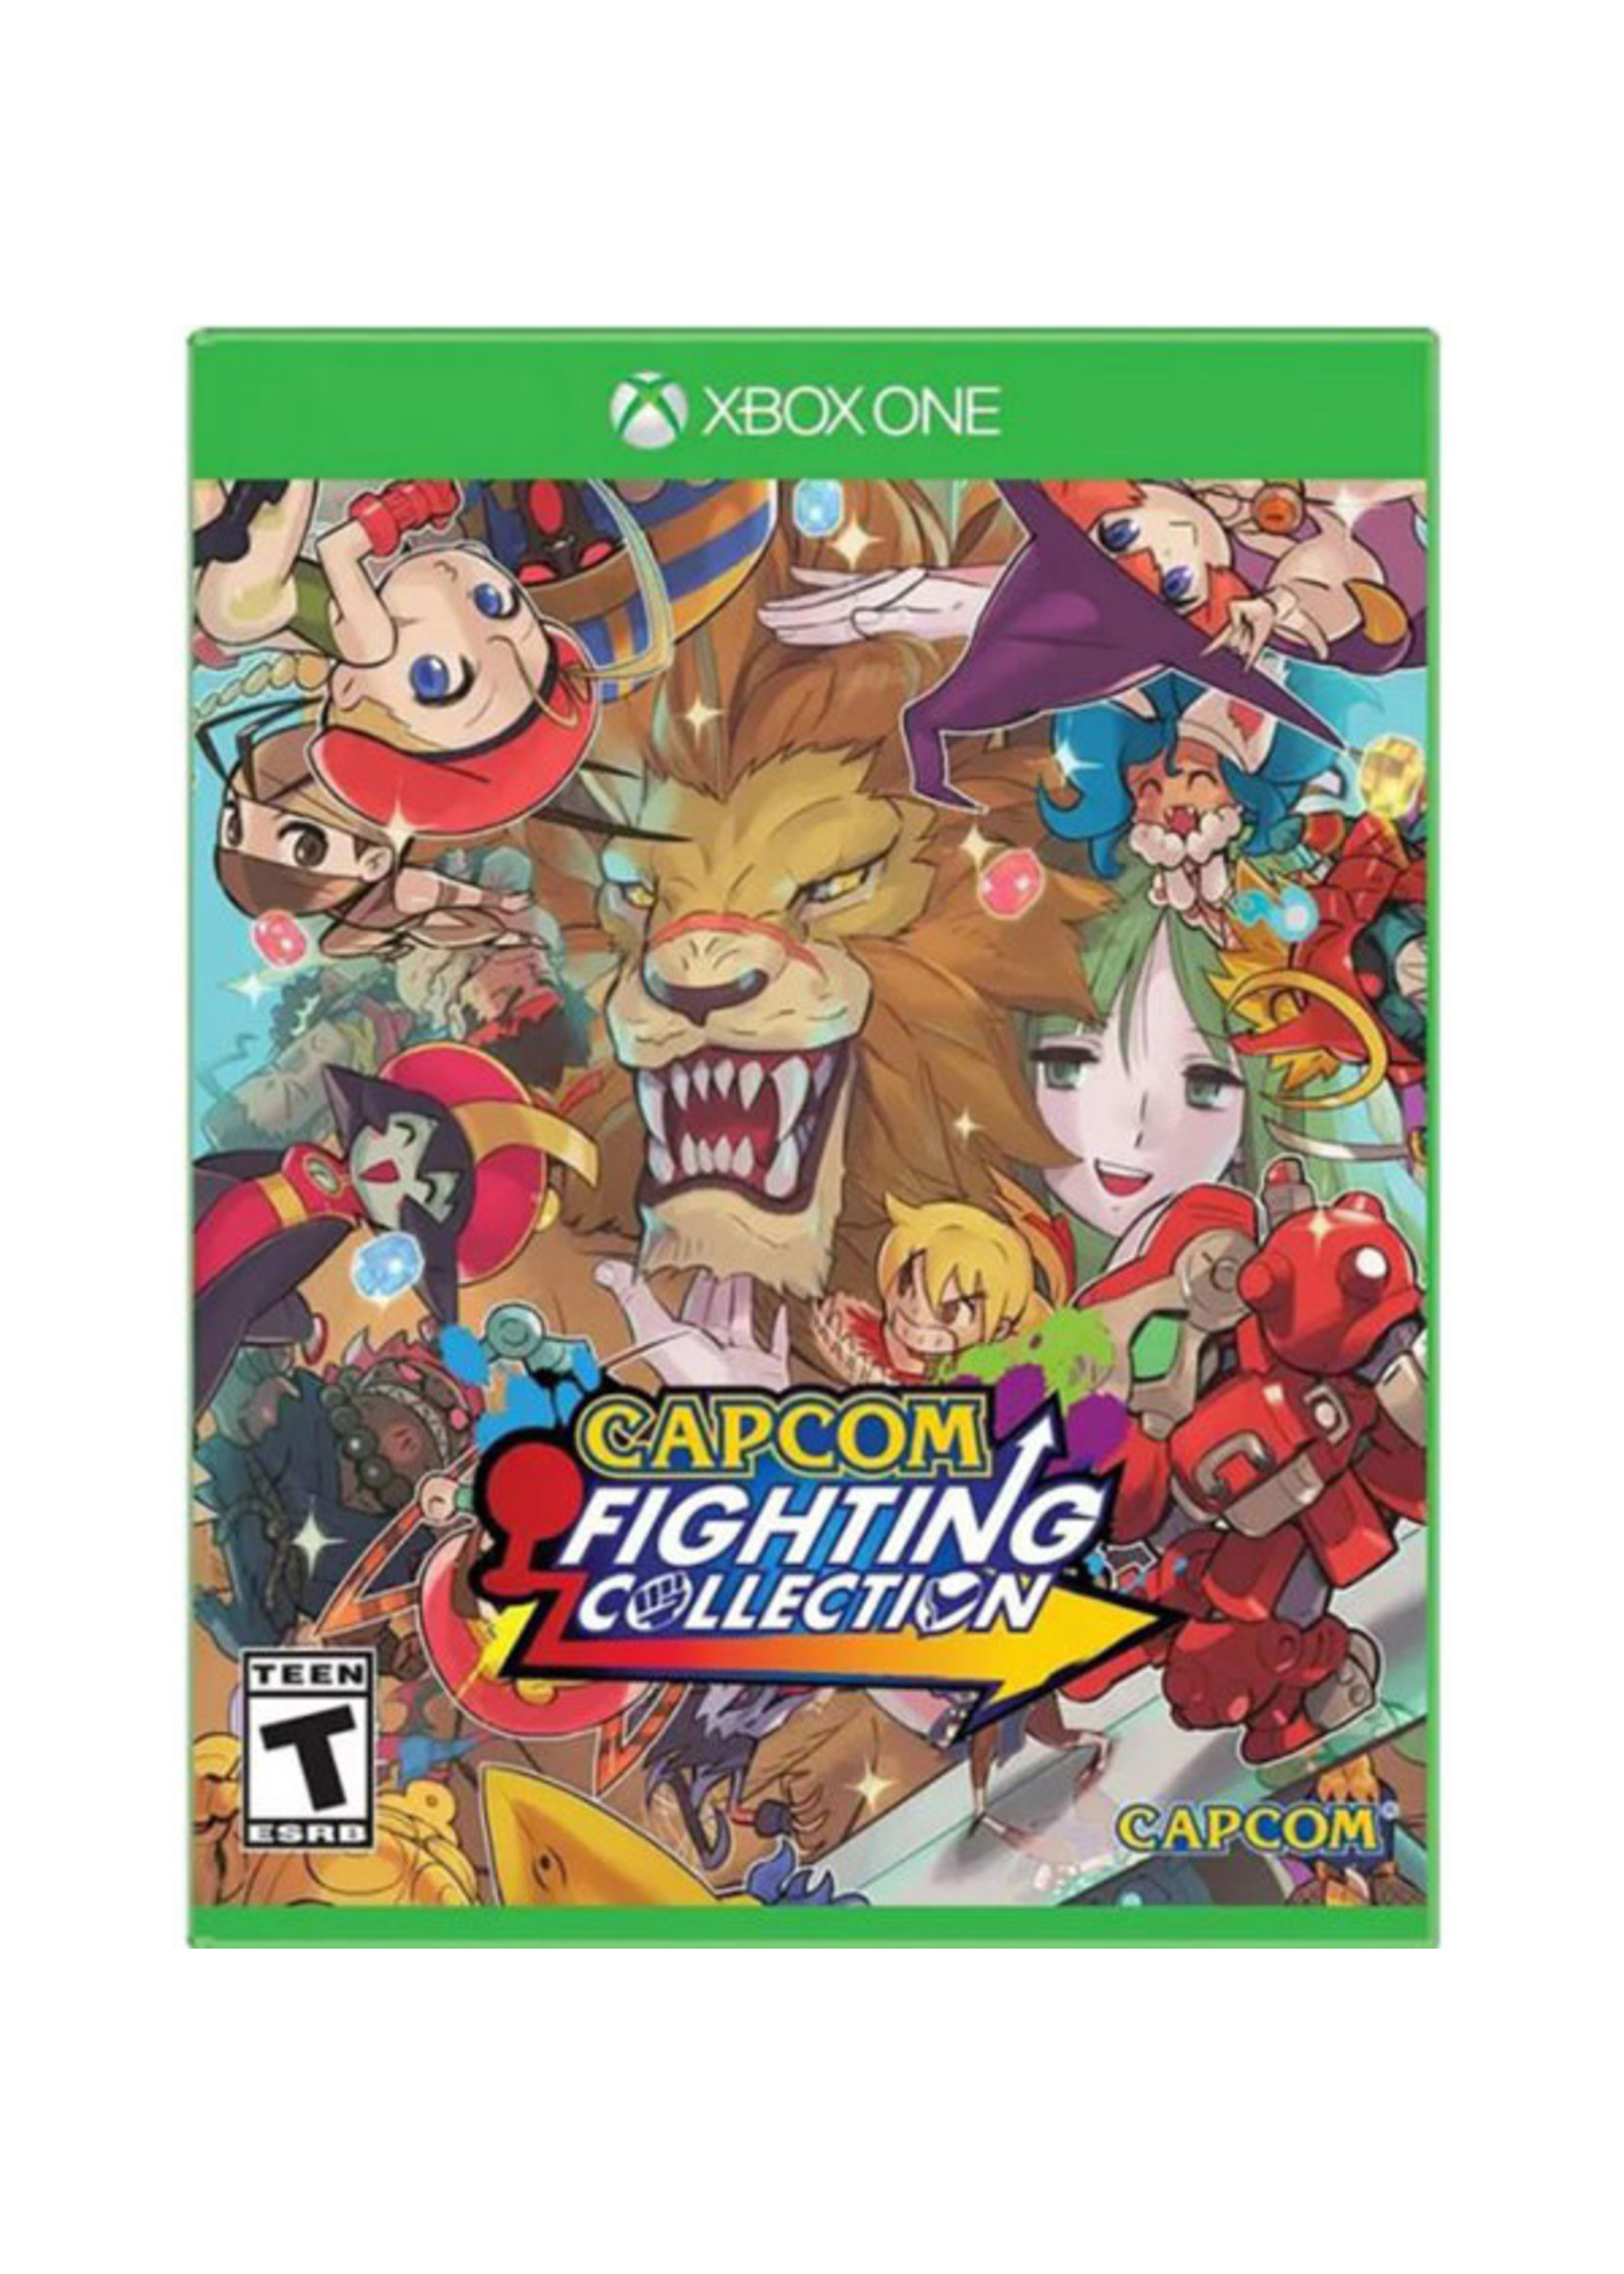 CAPCOM FIGHTING COLLECTION XBOX ONE